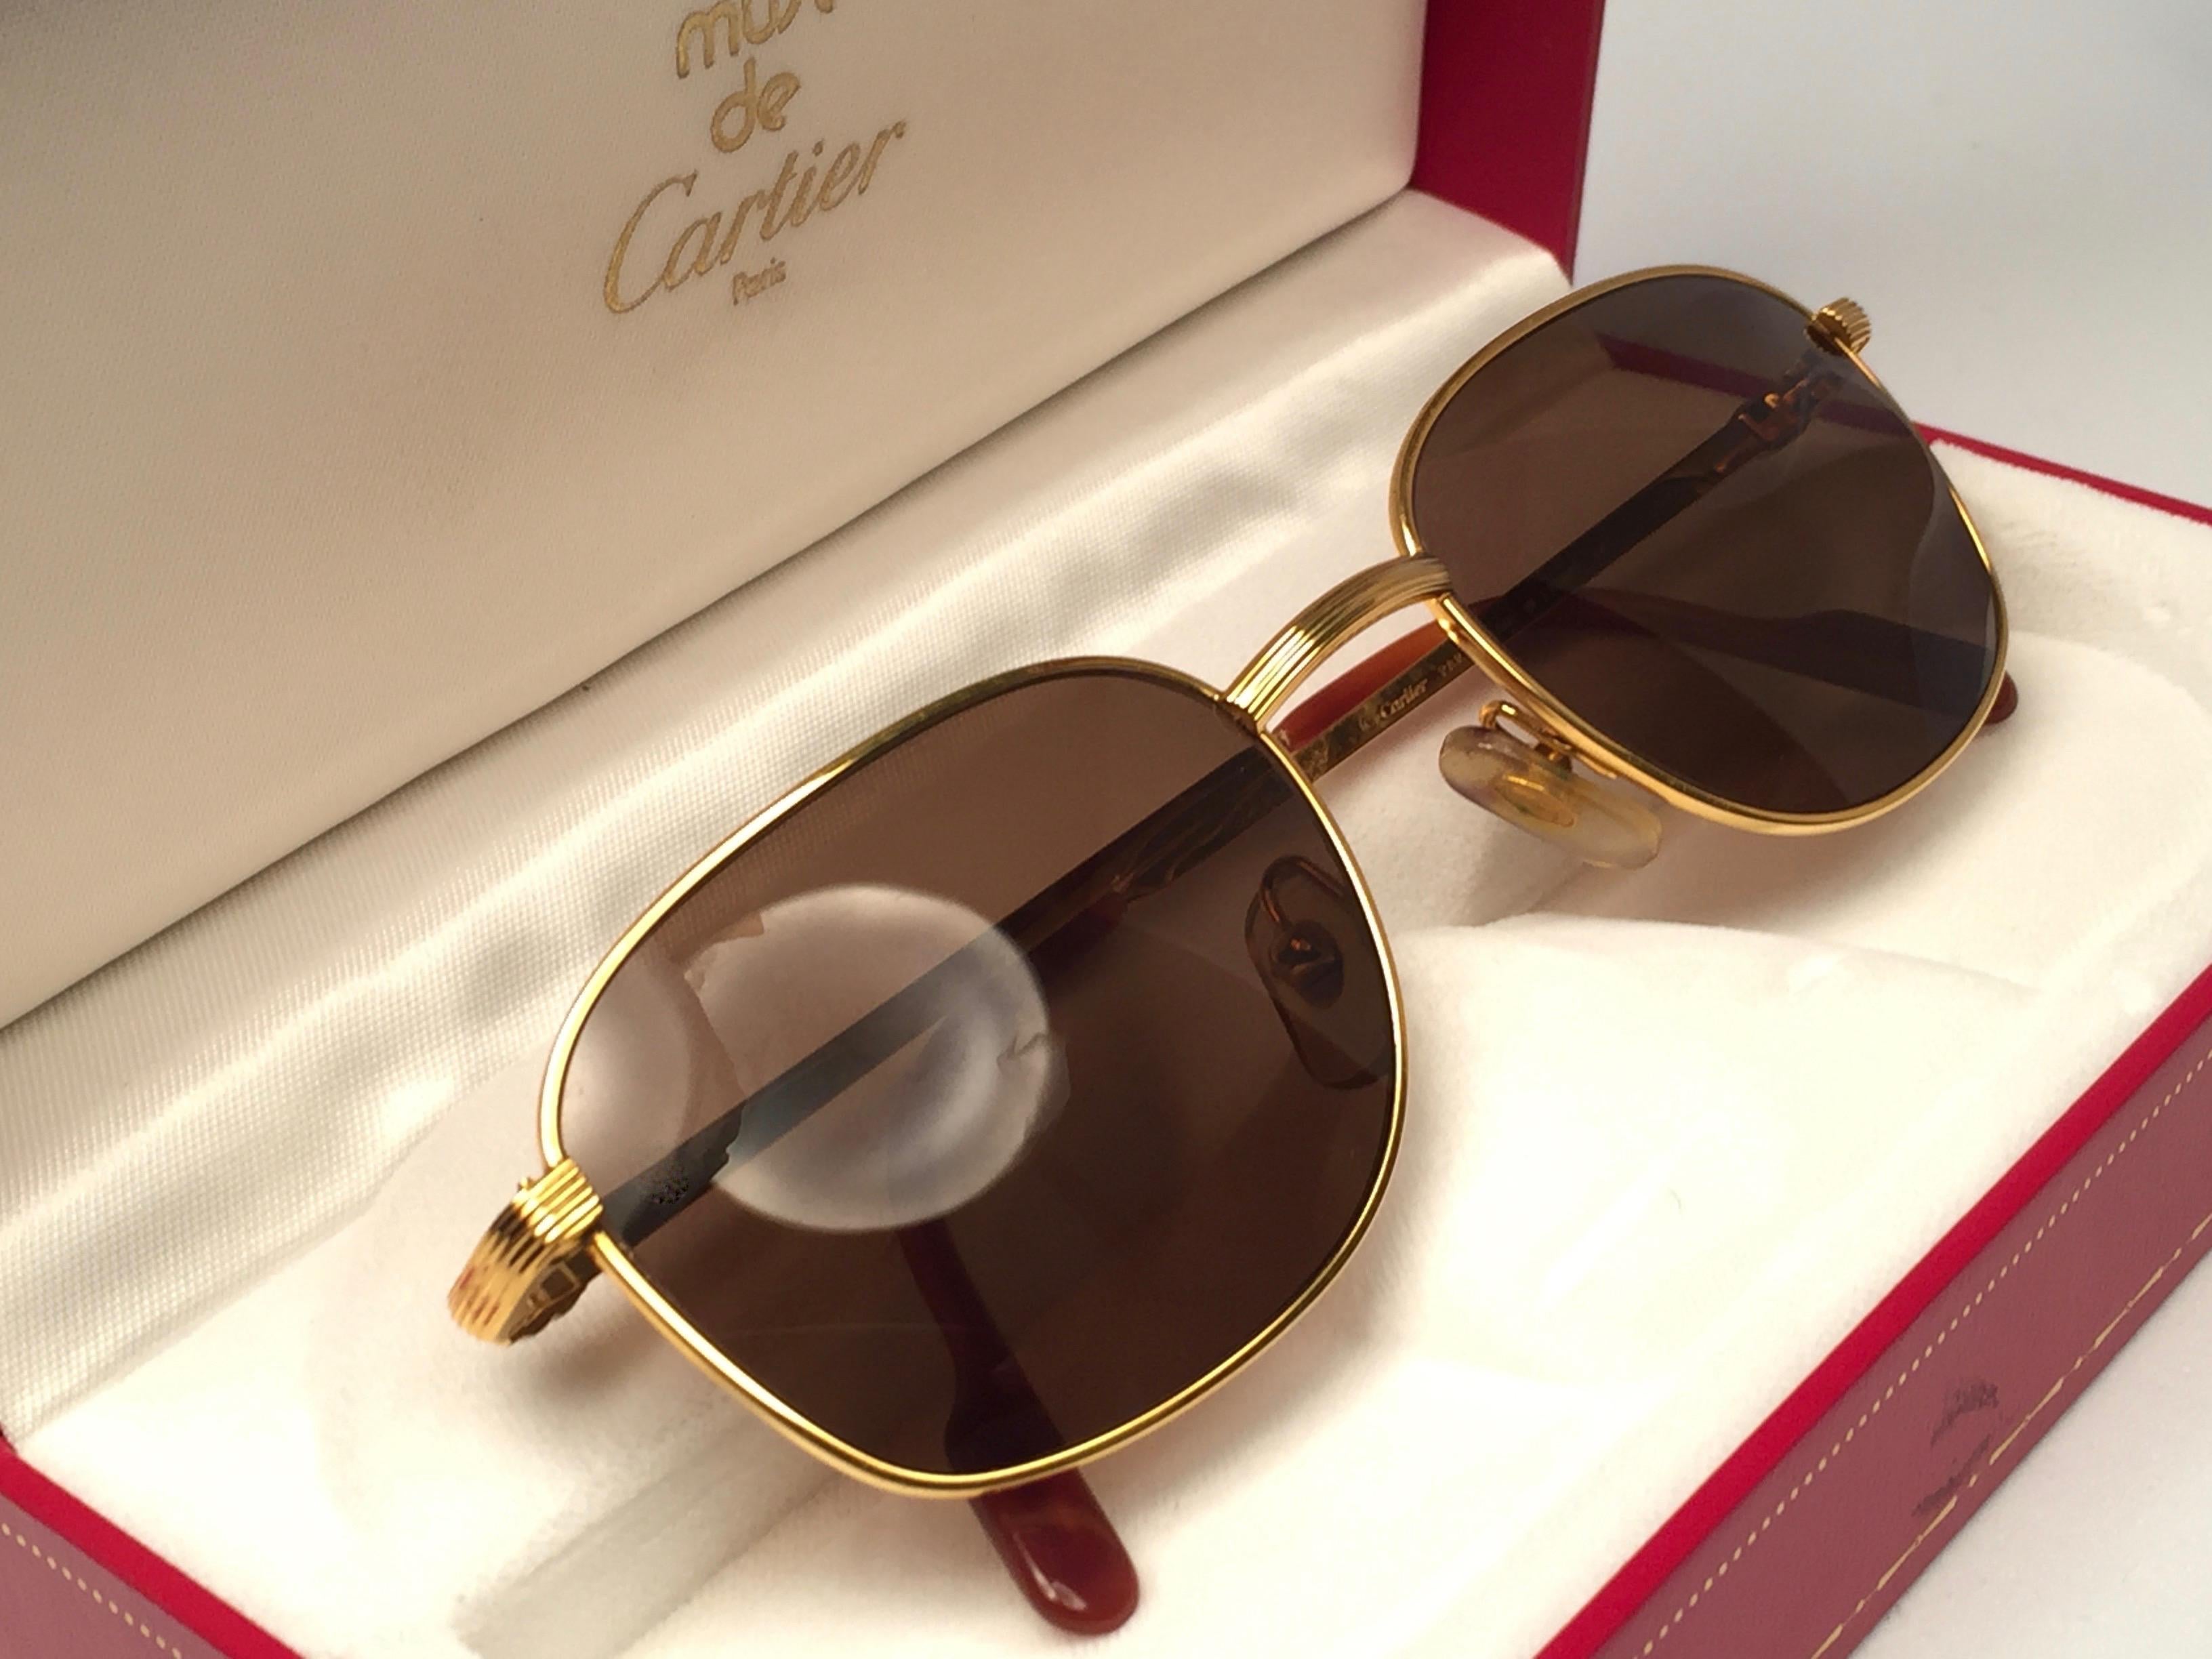 New 1990 Cartier Segur 54MM Sunglasses with brown (uv protection) lenses.  All hallmarks. Cartier gold signs on the ear paddles. These are like a pair of jewels on your nose. This piece may have minor sign of wear due to storage.
Beautiful design